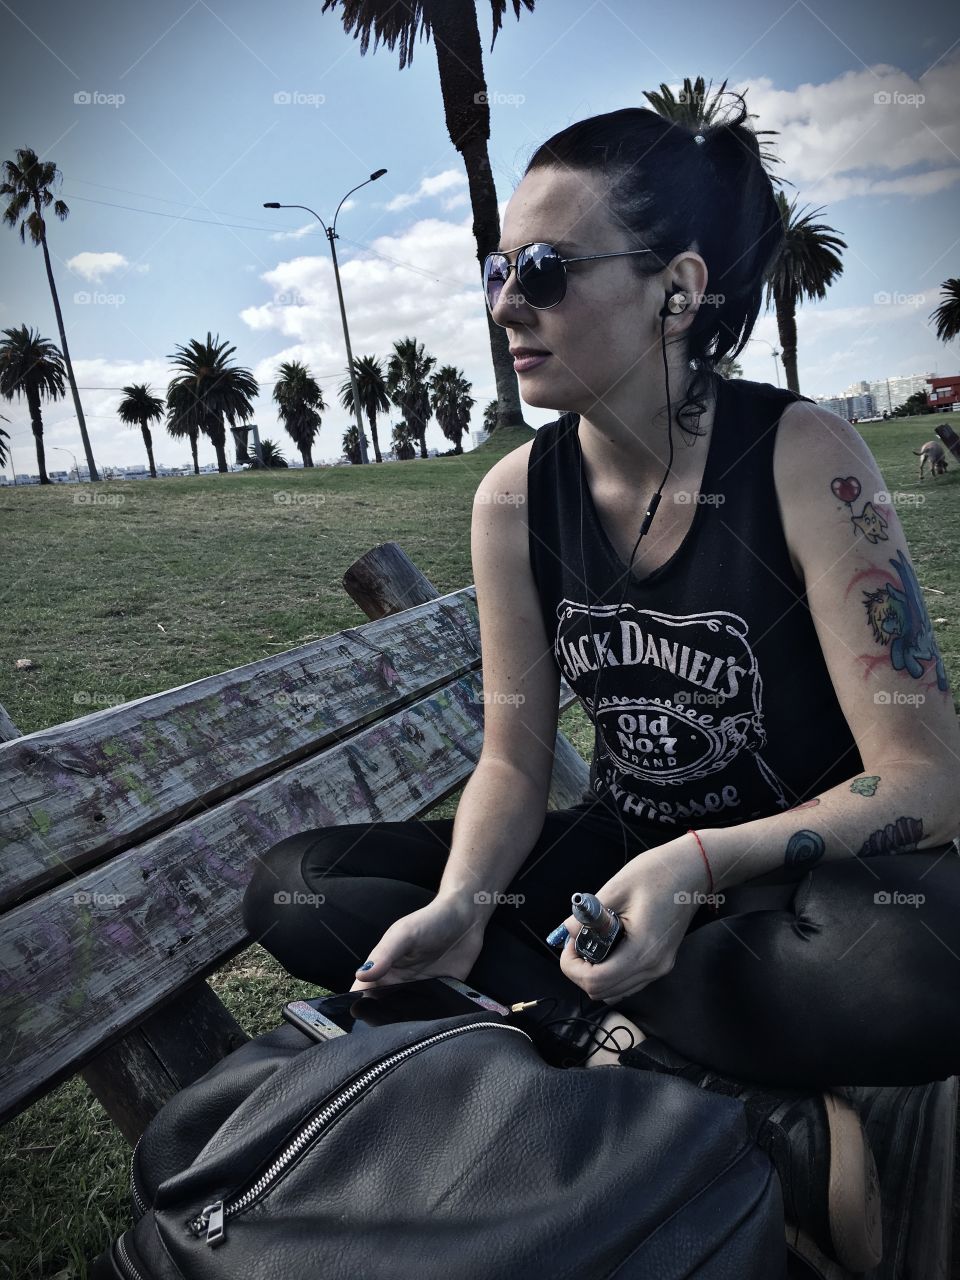 Woman with tattoo sitting on bench listening to music